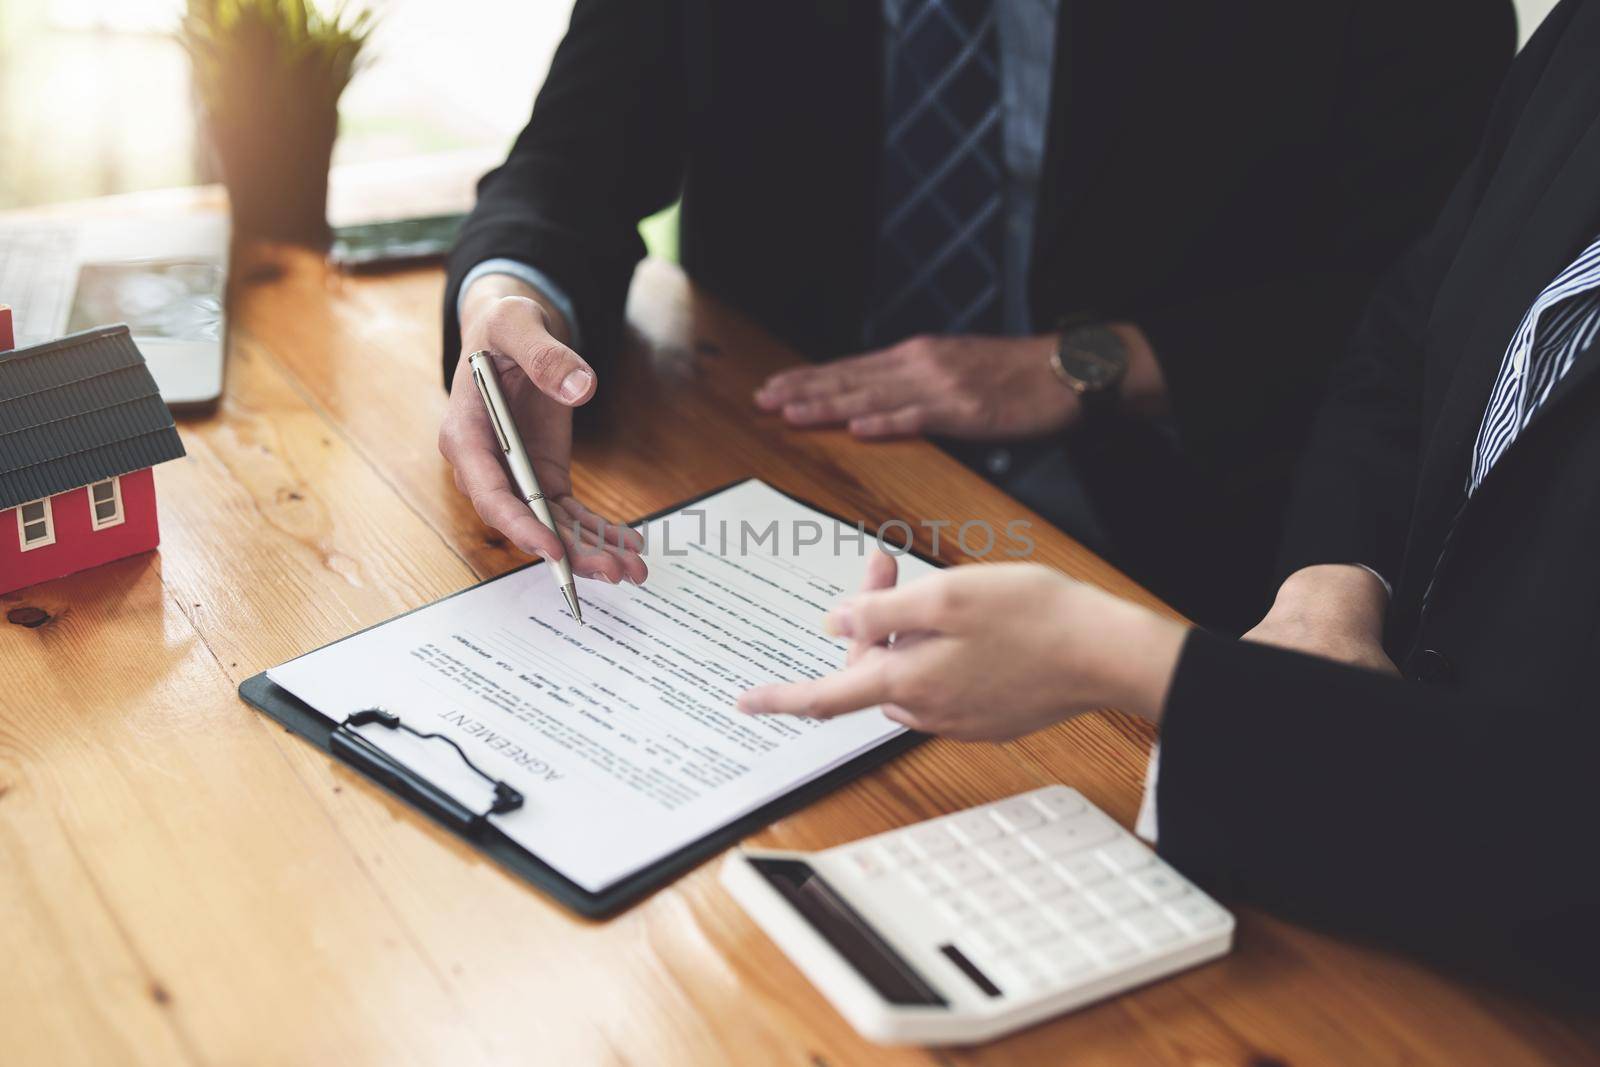 Guarantees, mortgages, signing, interest on loans, real estate agents are making agreements with customers to buy houses and land and sign contract documents.